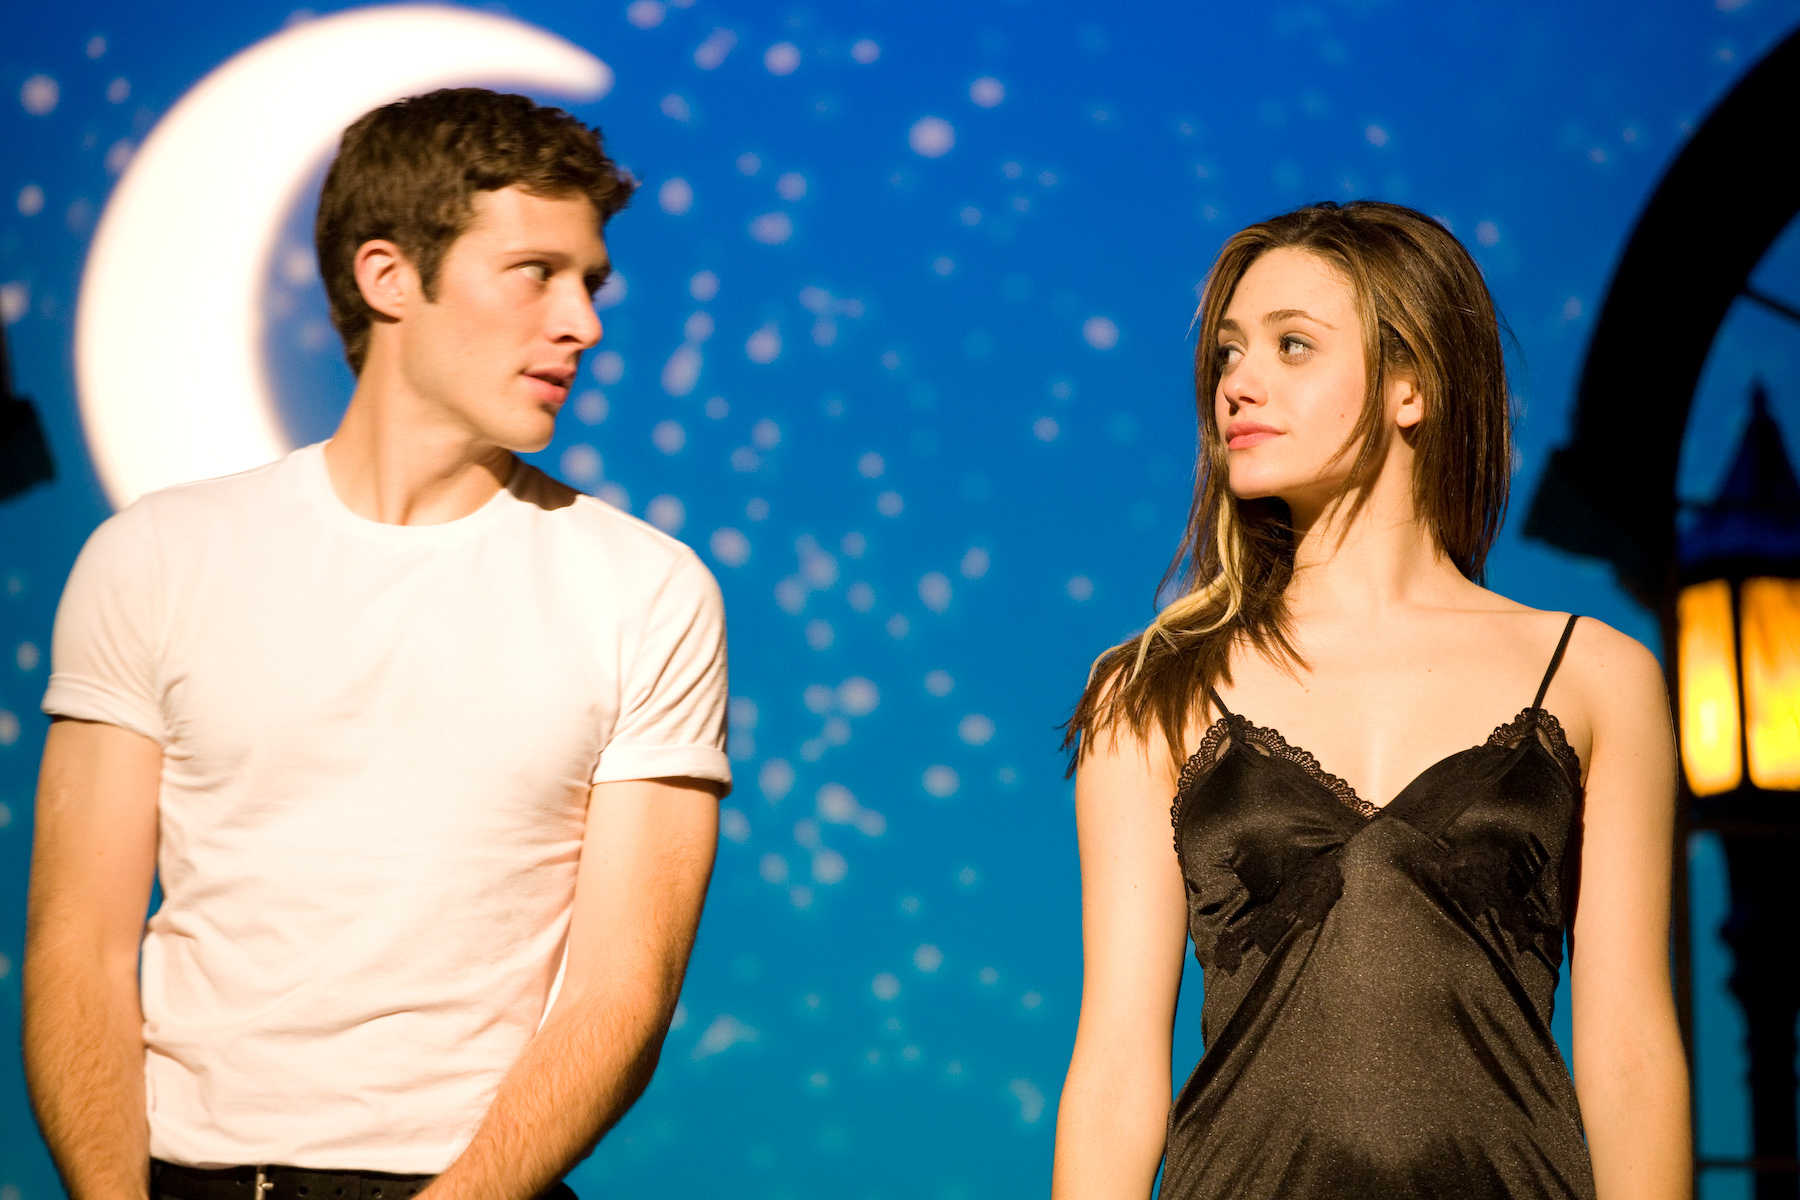 Zach Gilford stars as Johnny Drake and Emmy Rossum stars as Alexa Walker in Image Entertainment's Dare (2009)